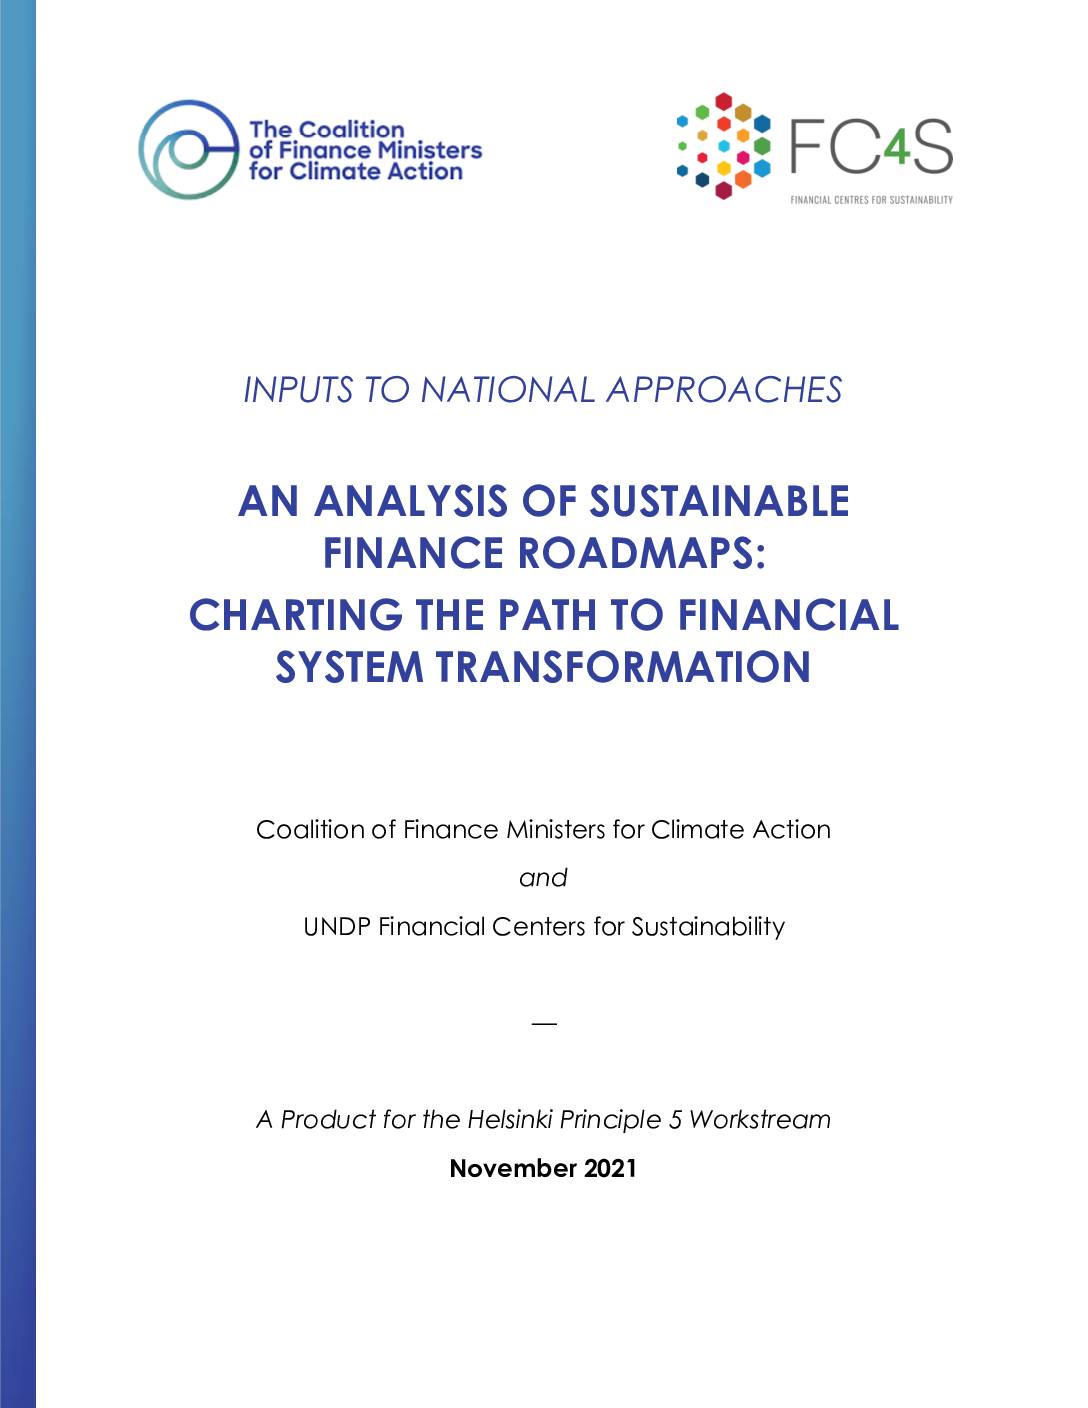 Analysis of Sustainable Finance Roadmaps: Charting the Path to Financial System Transformation